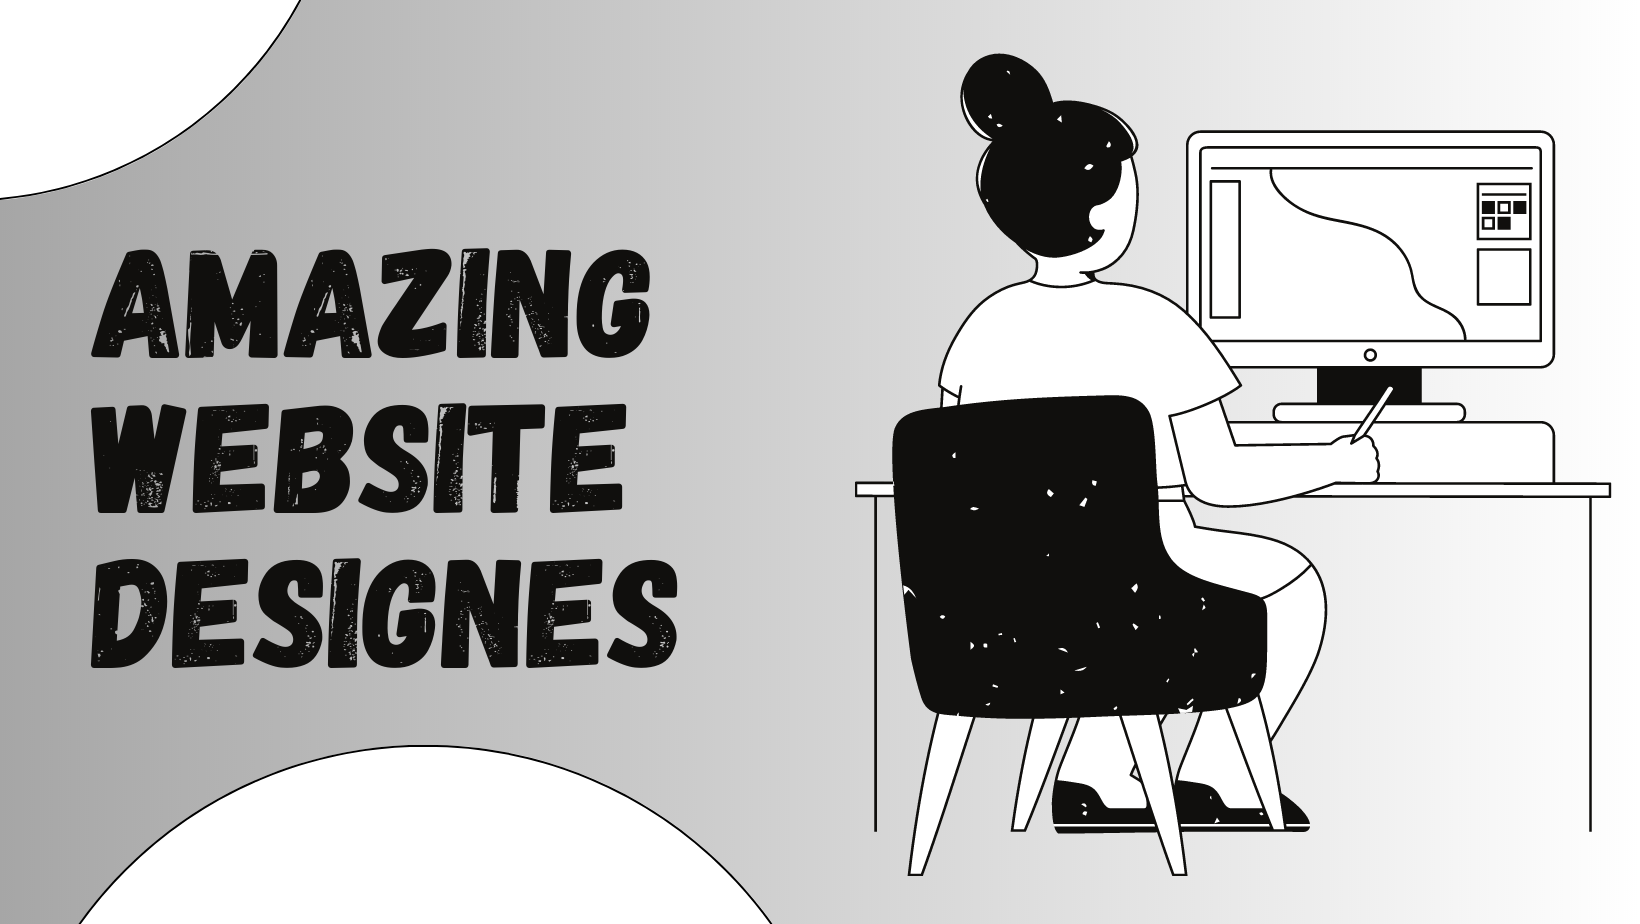 Look into the amazing websites that will blow your mind!